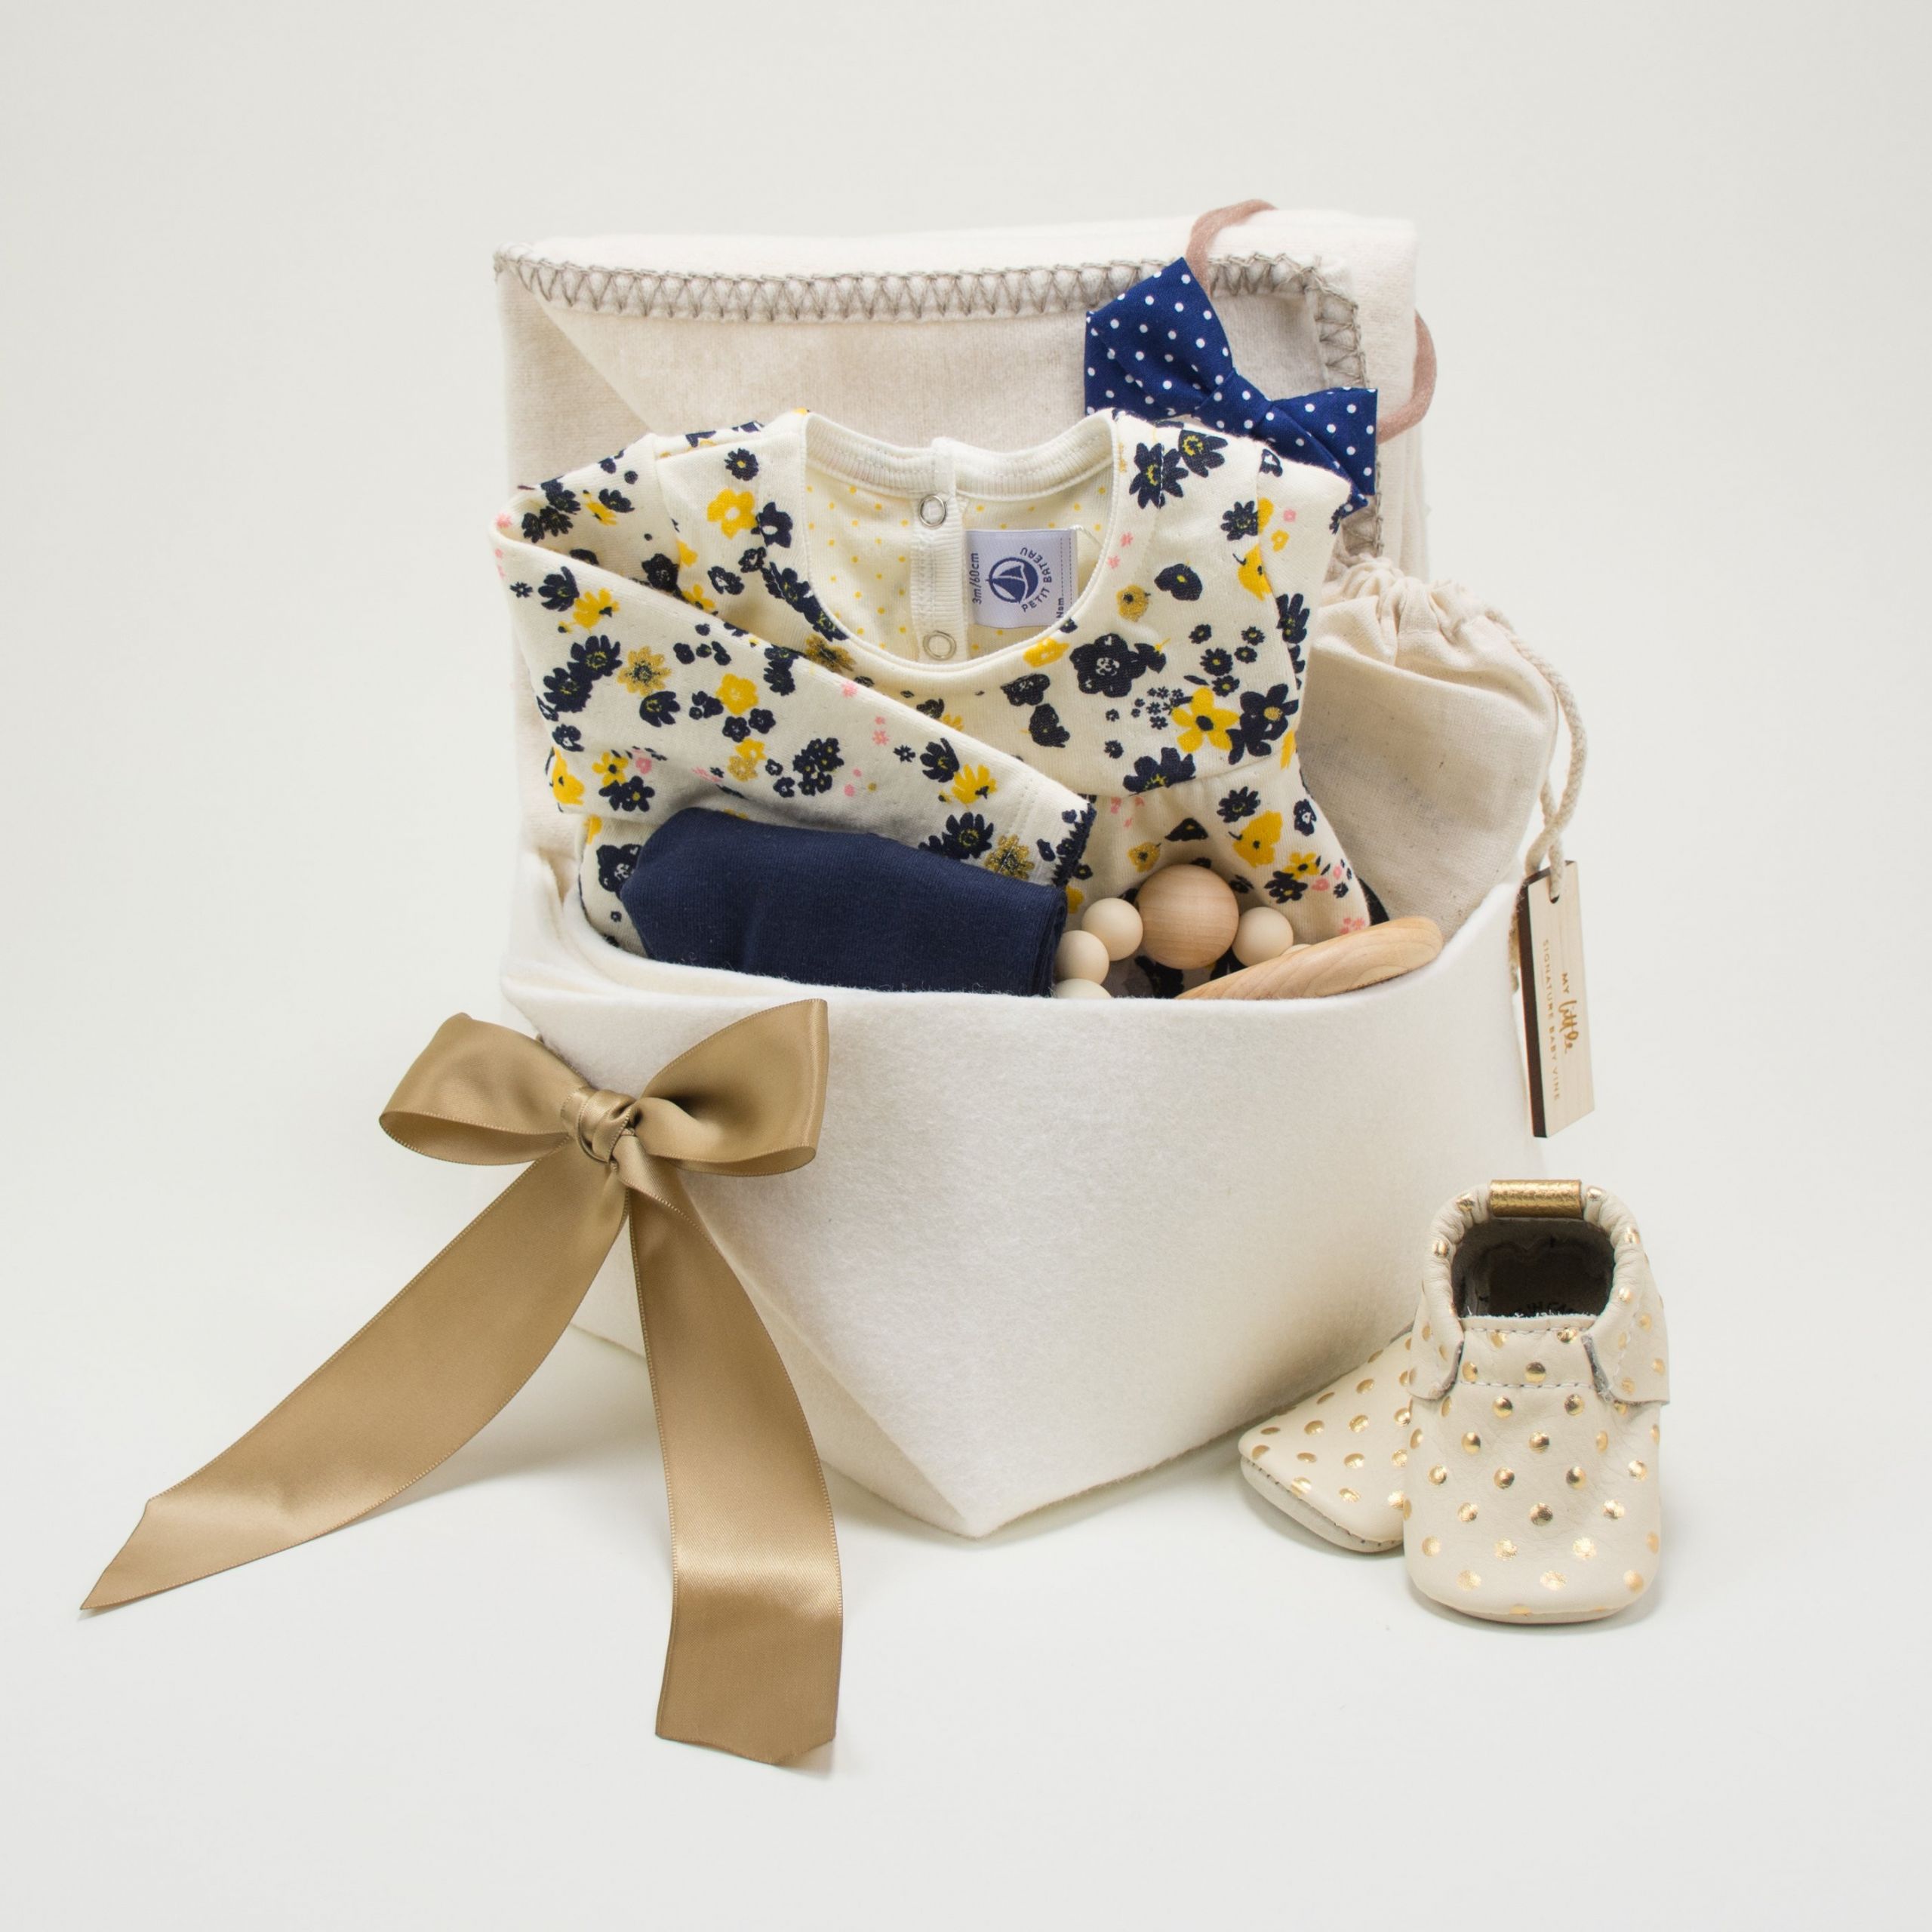 Luxury Baby Gift Baskets
 Designer Feature David Fussenegger Textiles and the